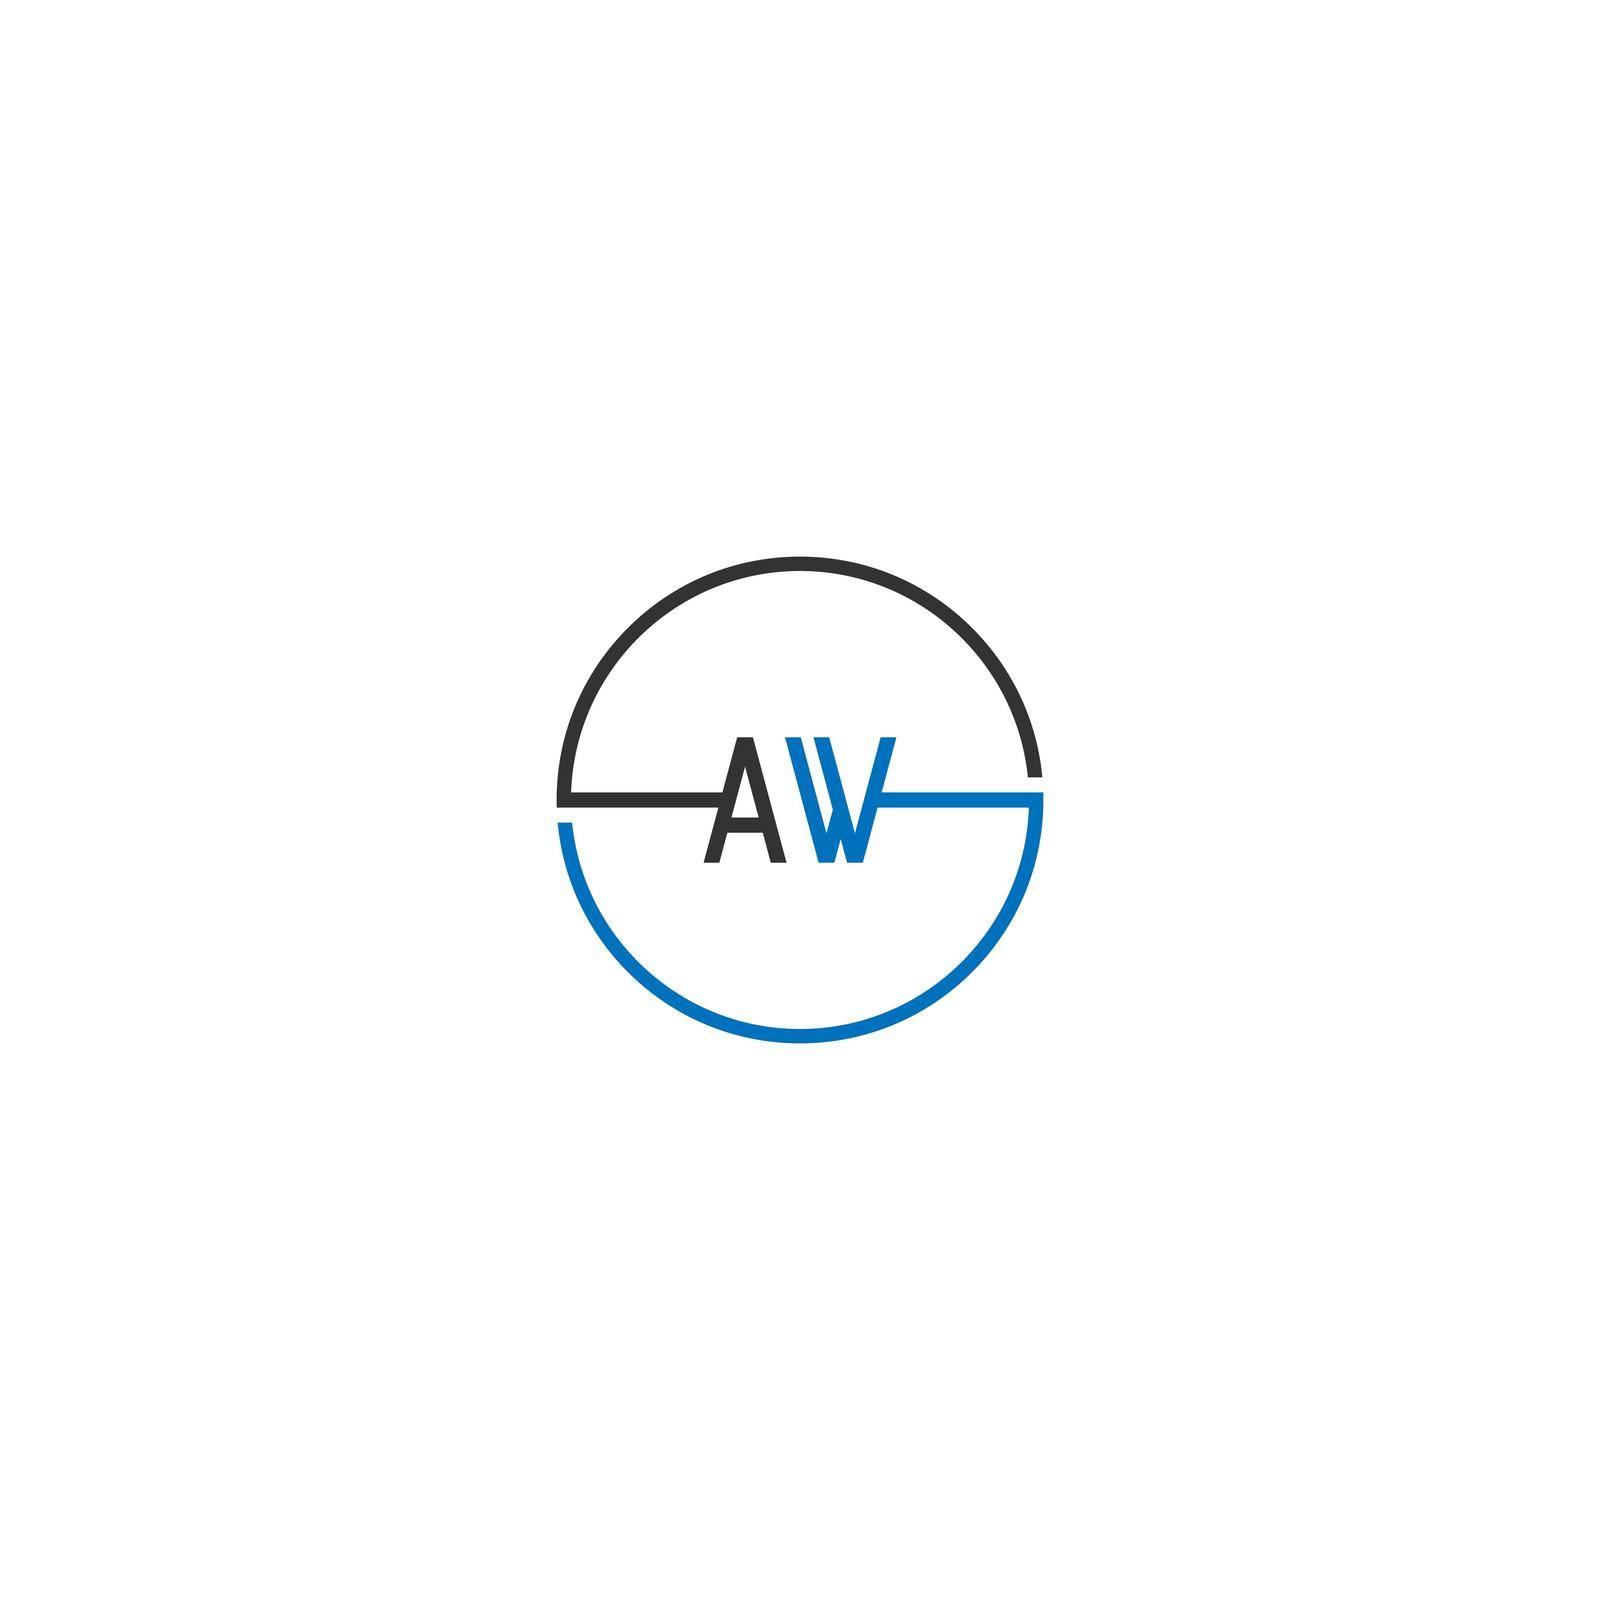 AW logo letter design concept by bellaxbudhong3